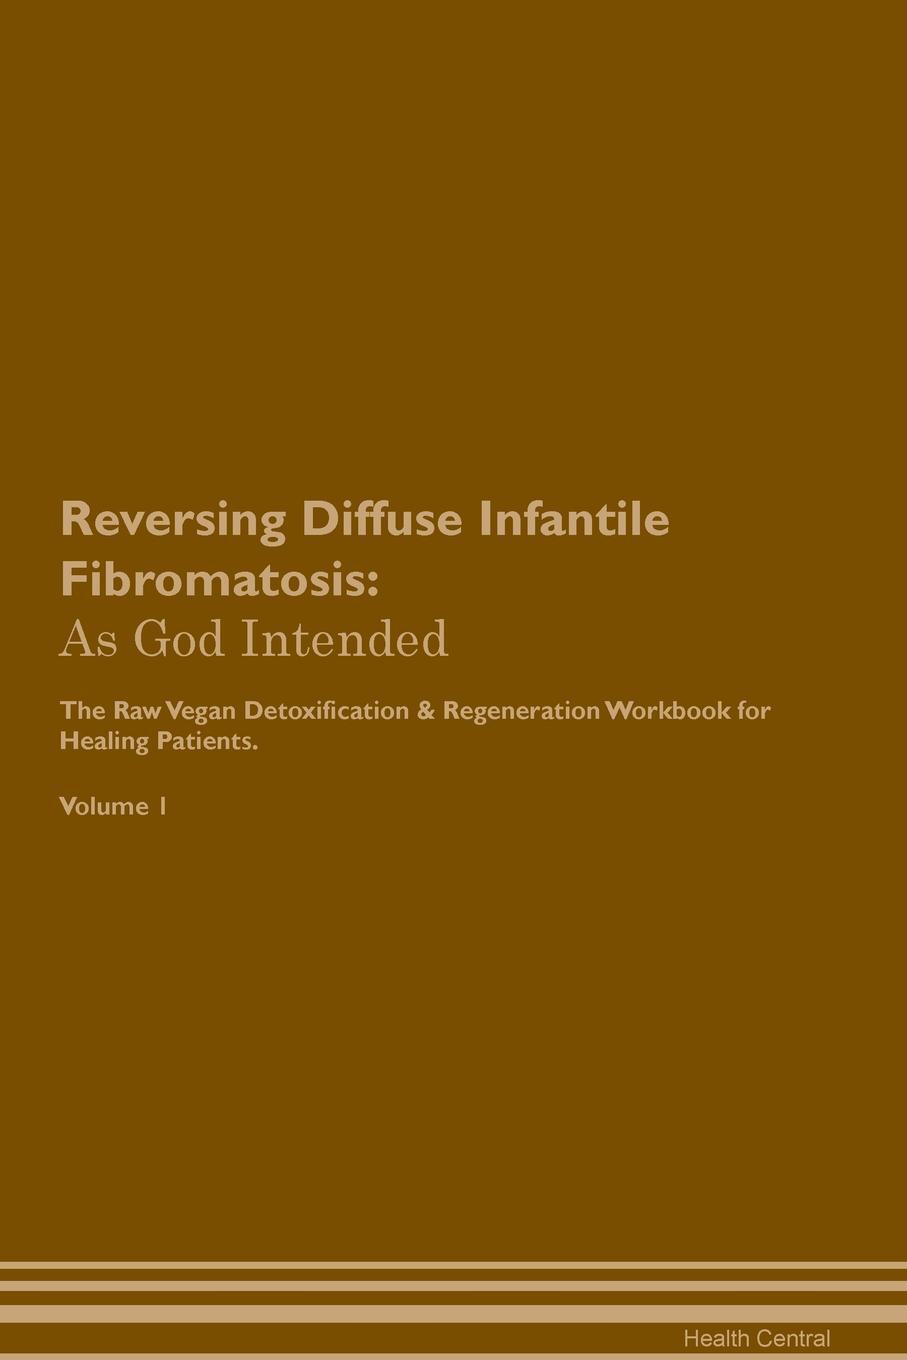 фото Reversing Diffuse Infantile Fibromatosis. As God Intended The Raw Vegan Plant-Based Detoxification & Regeneration Workbook for Healing Patients. Volume 1